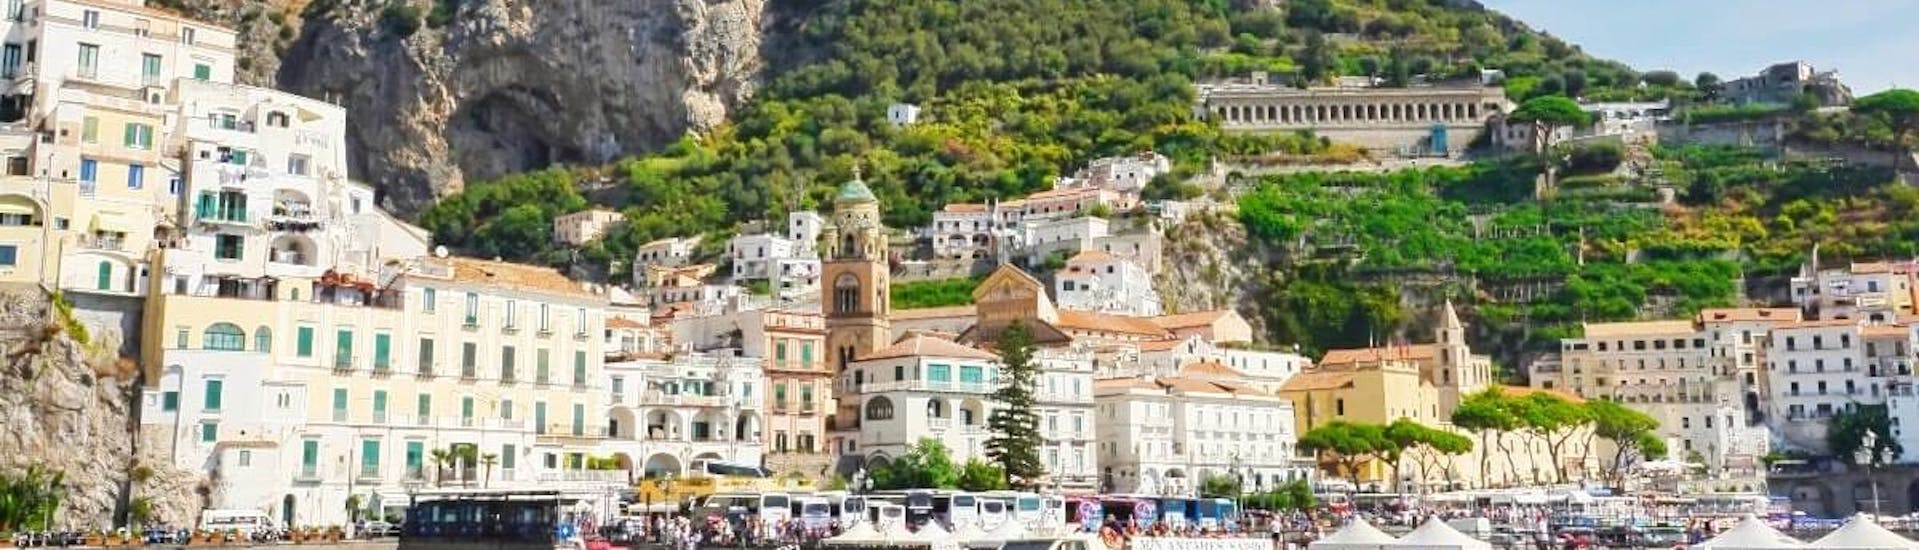 View of Amalfi that can be visited during the Boat Trip from Pozzuoli to Capri and Amalfi with Lunch organized by Gestour Pozzuoli.